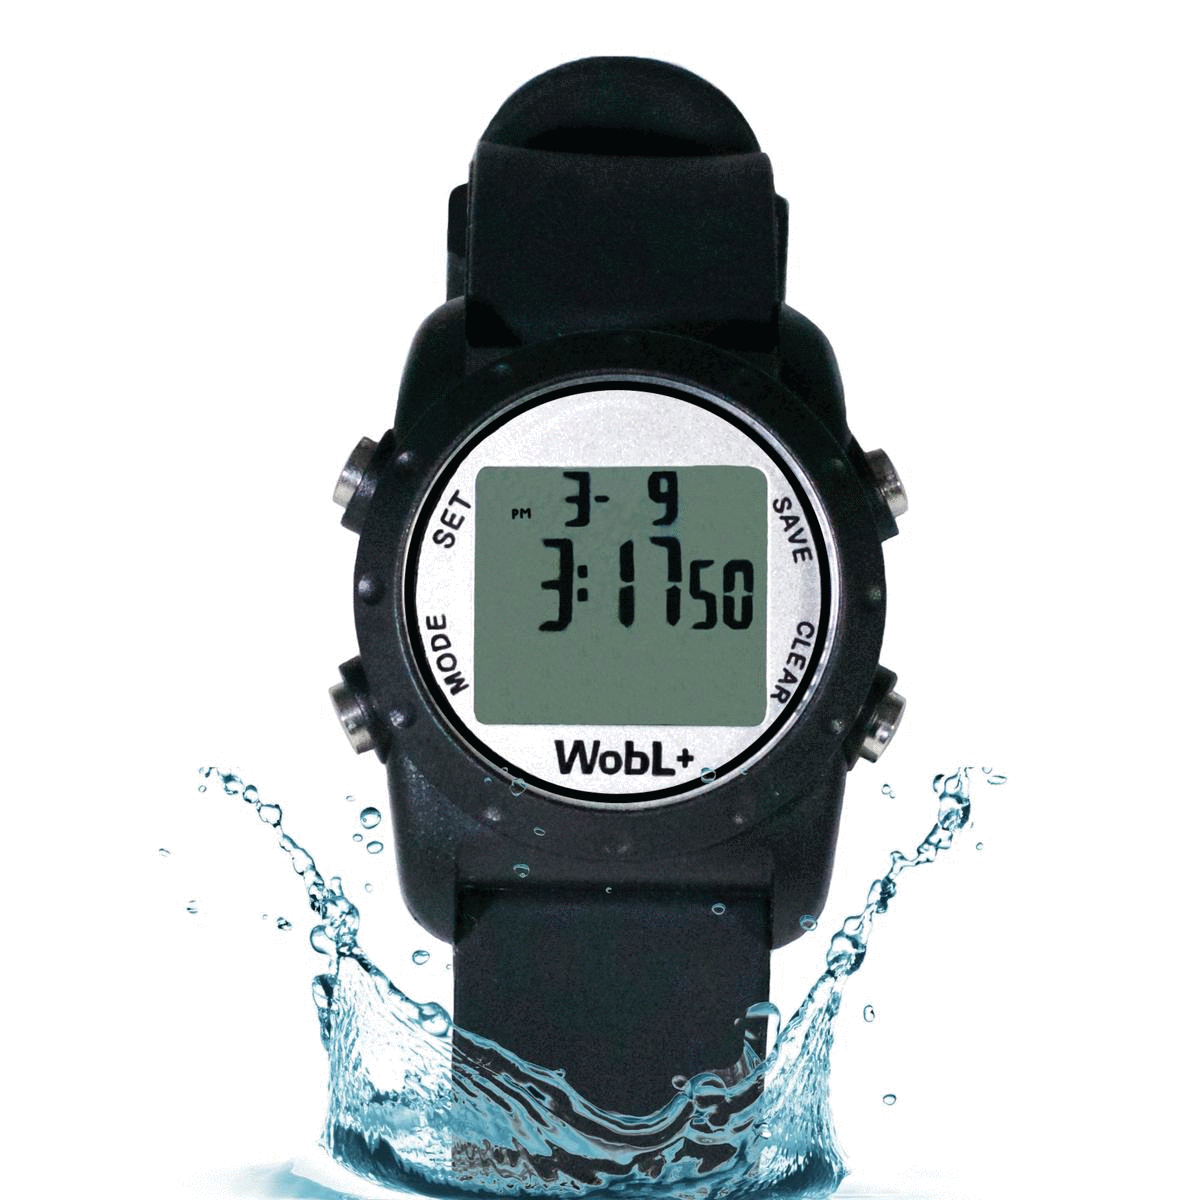 WobL+ Waterproof vibrating alarm watch in black, green, pink, and blue